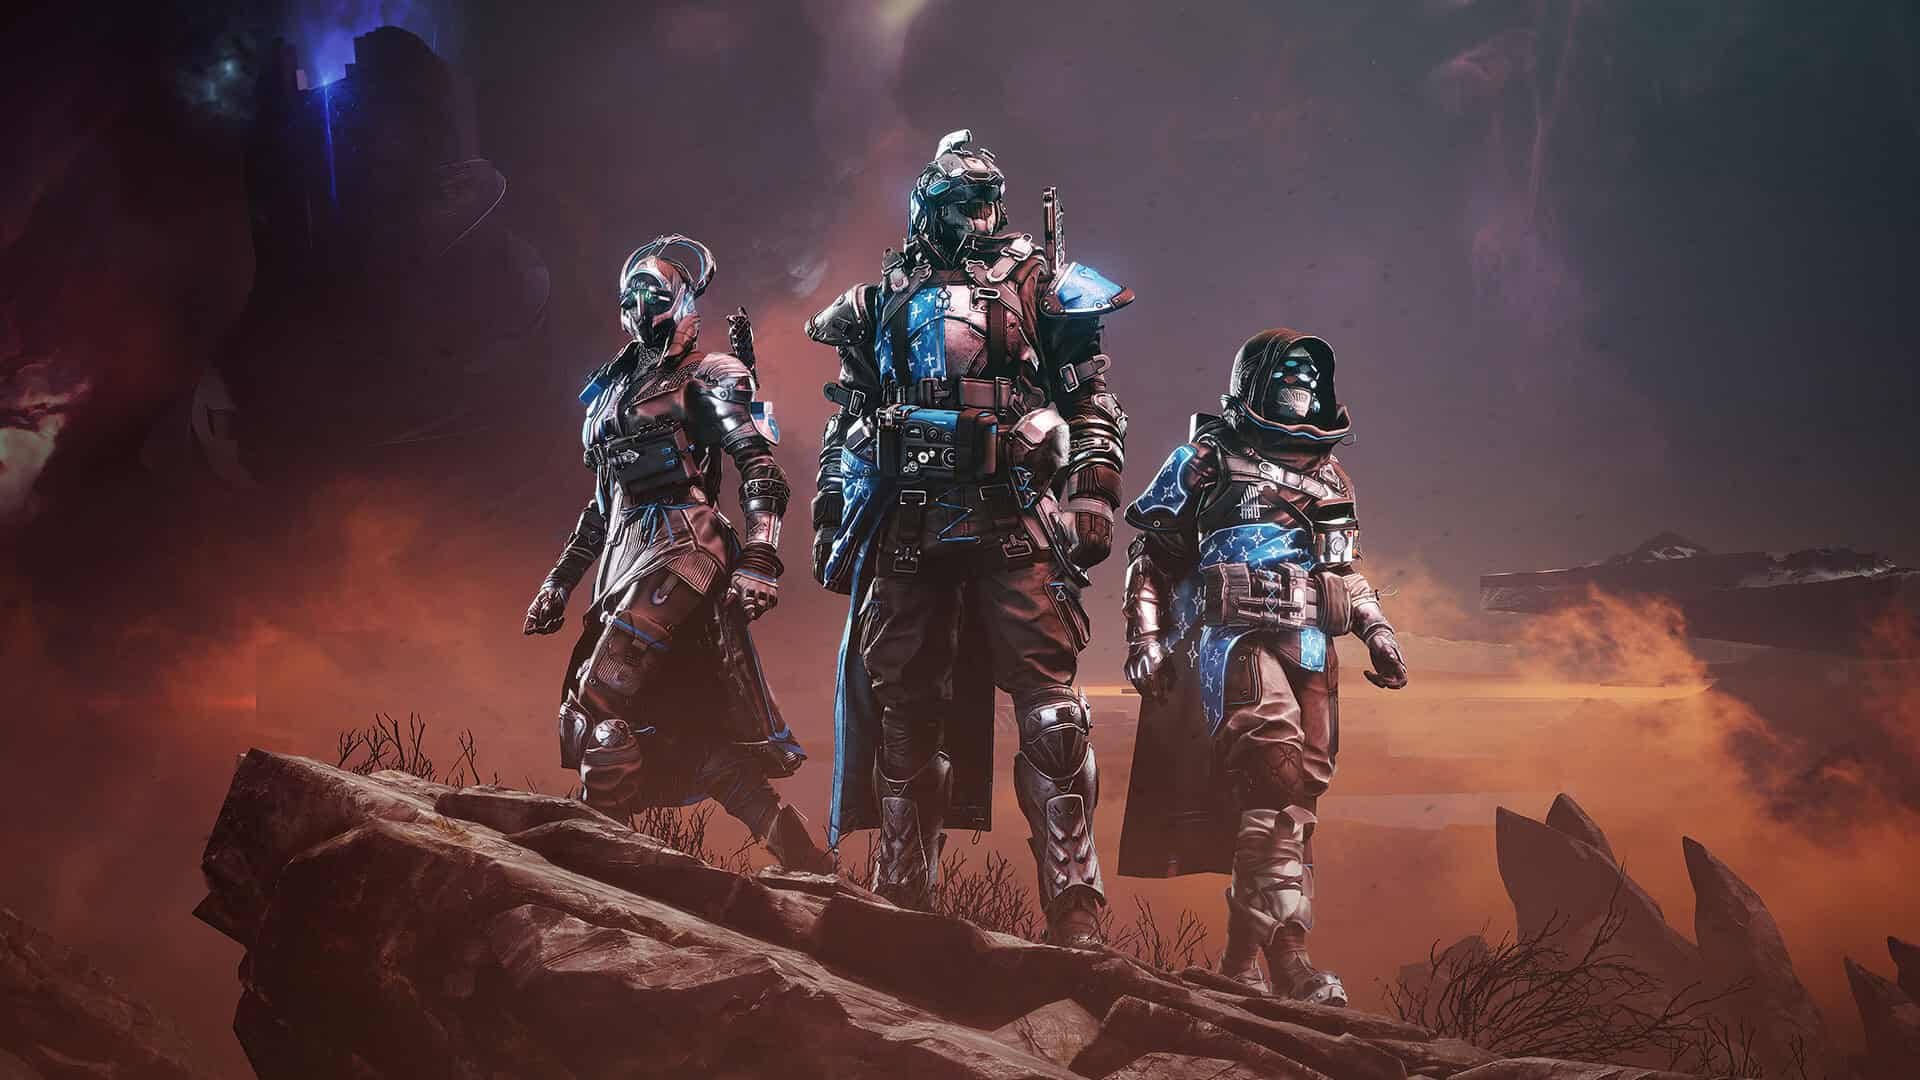 destiny 2 the final shape release time - three characters wearing armour pose on a rock